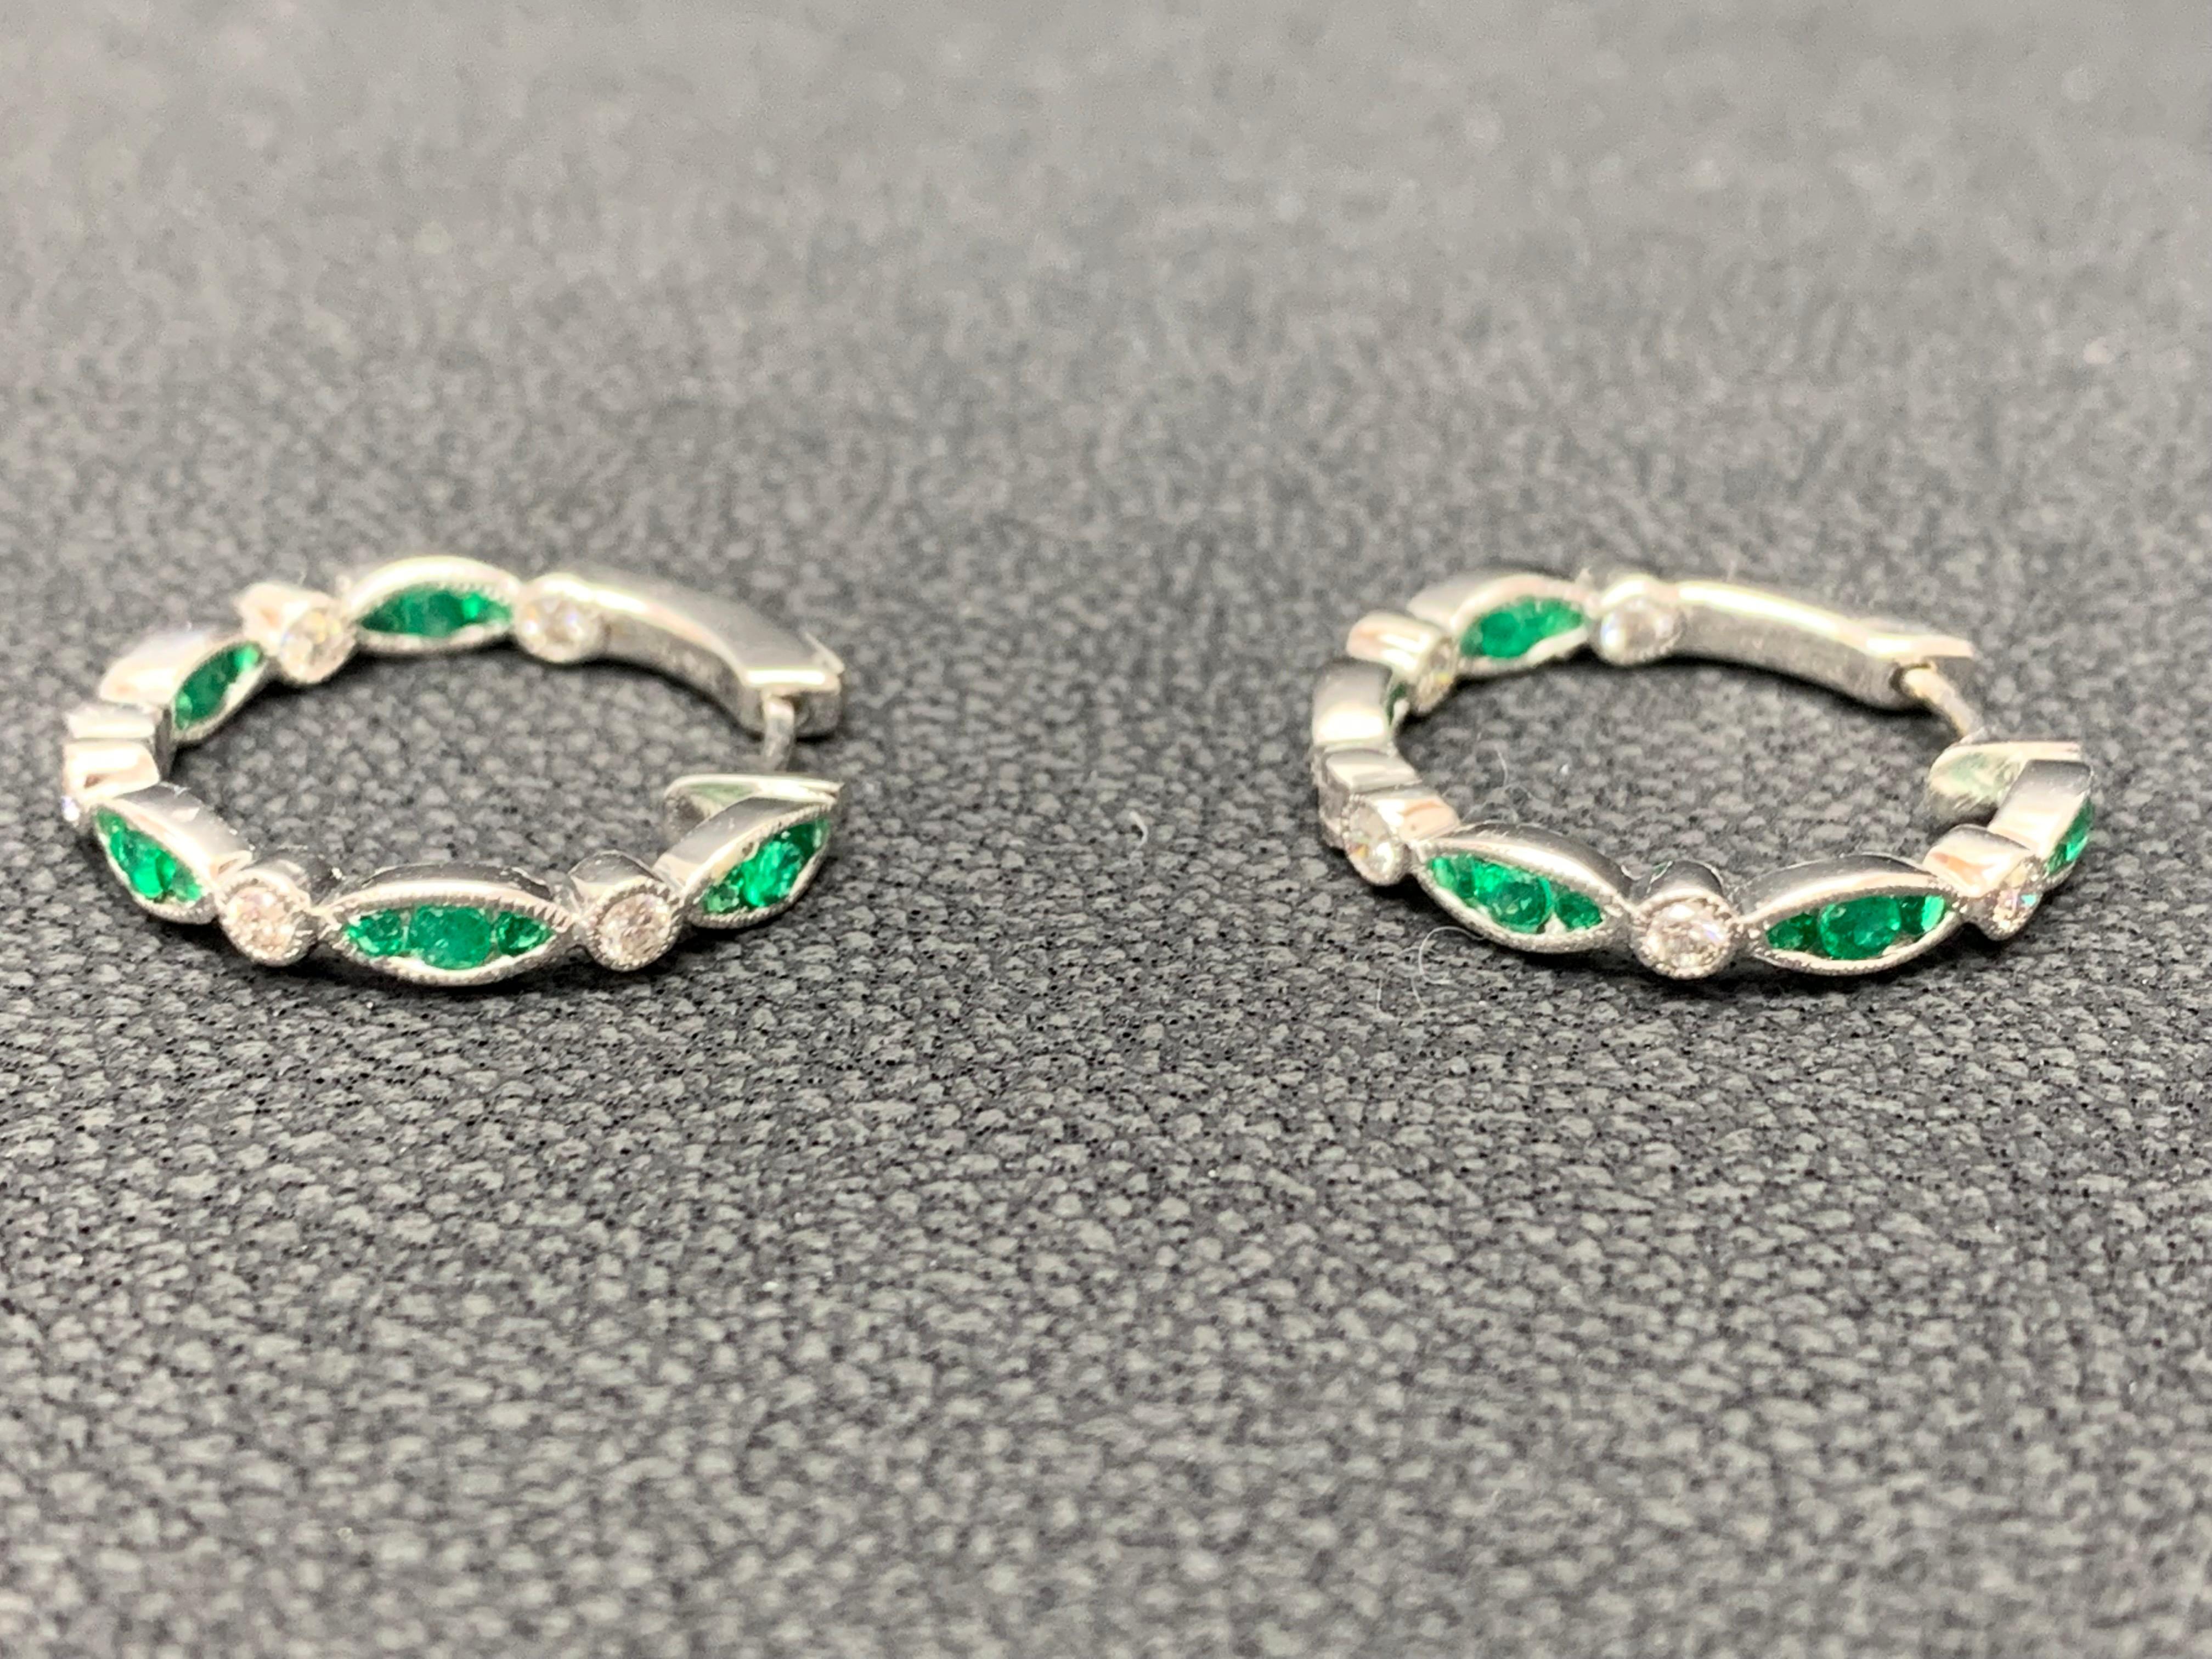 Women's 0.68 Carat Round Cut Emerald and Diamond Hoop Earrings in 18K White Gold For Sale